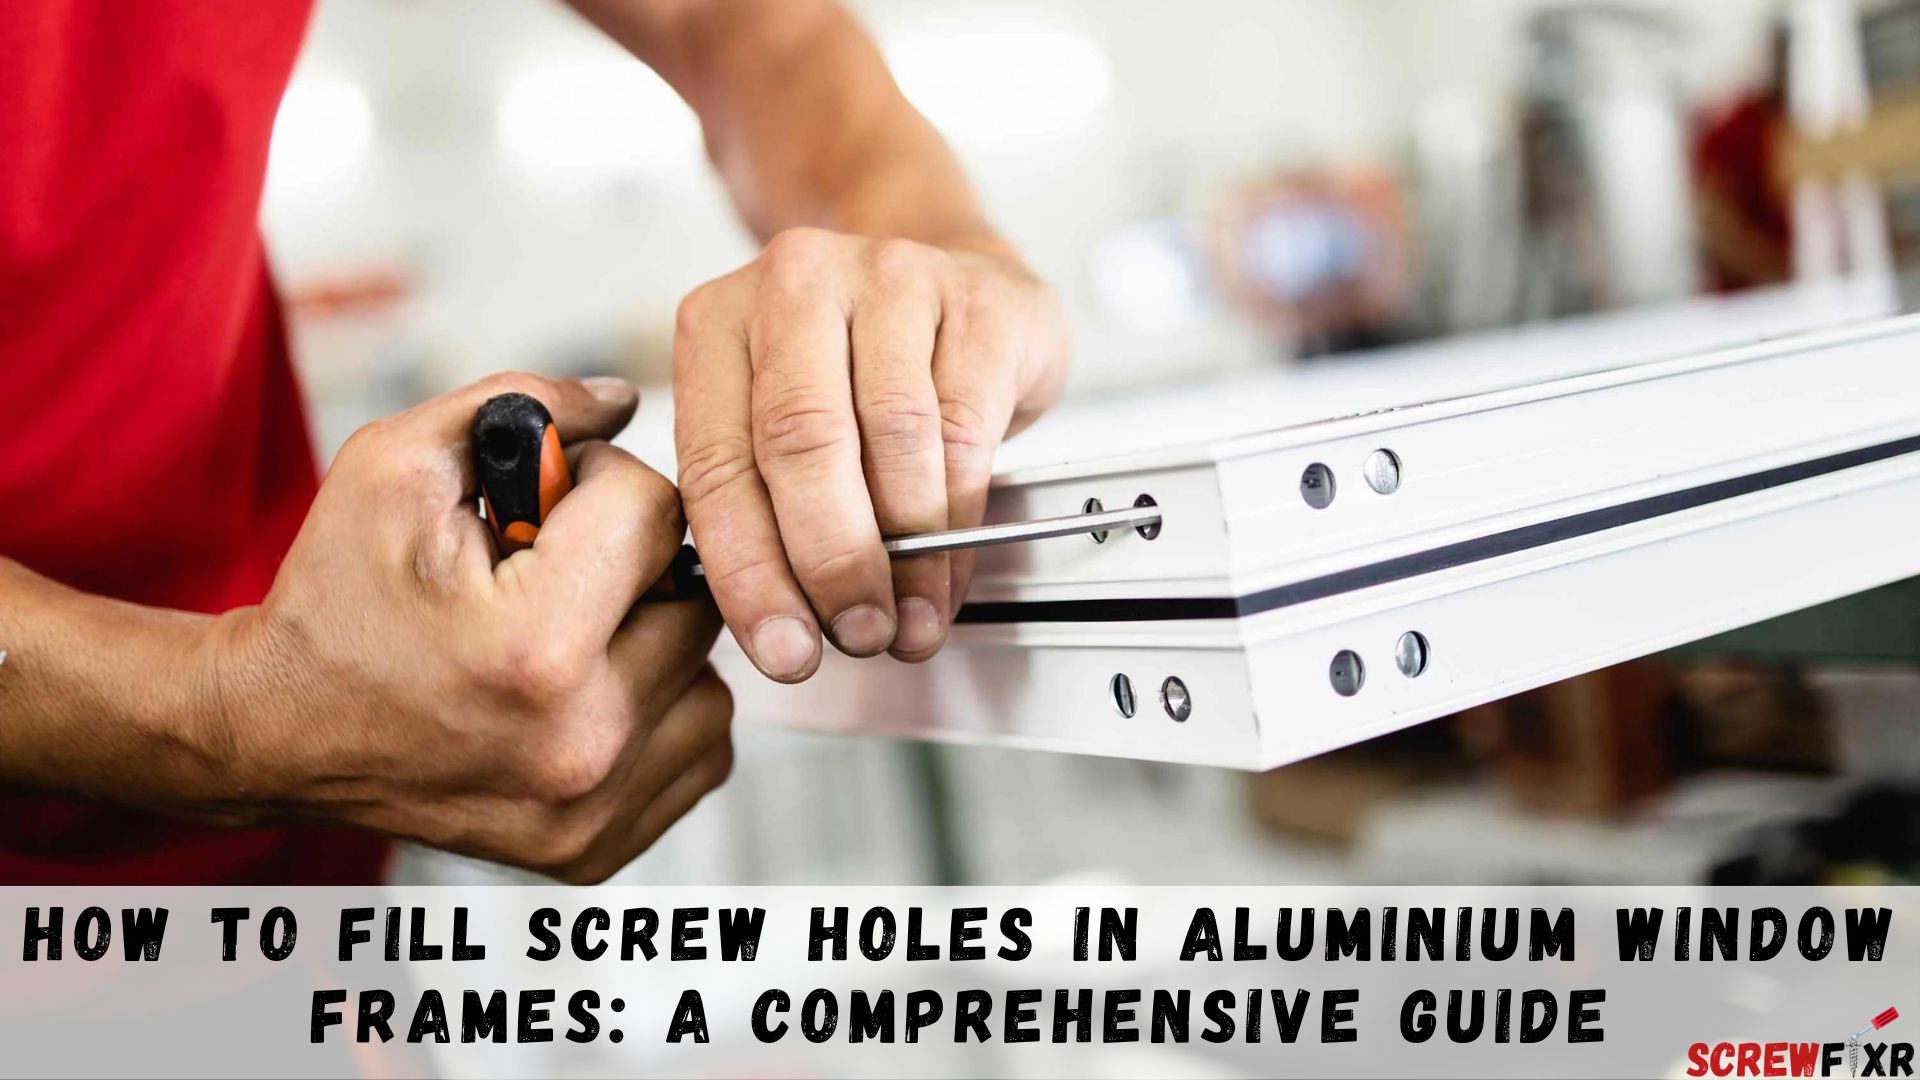 How To Fill Screw Holes In Aluminium Window Frames: A Comprehensive Guide